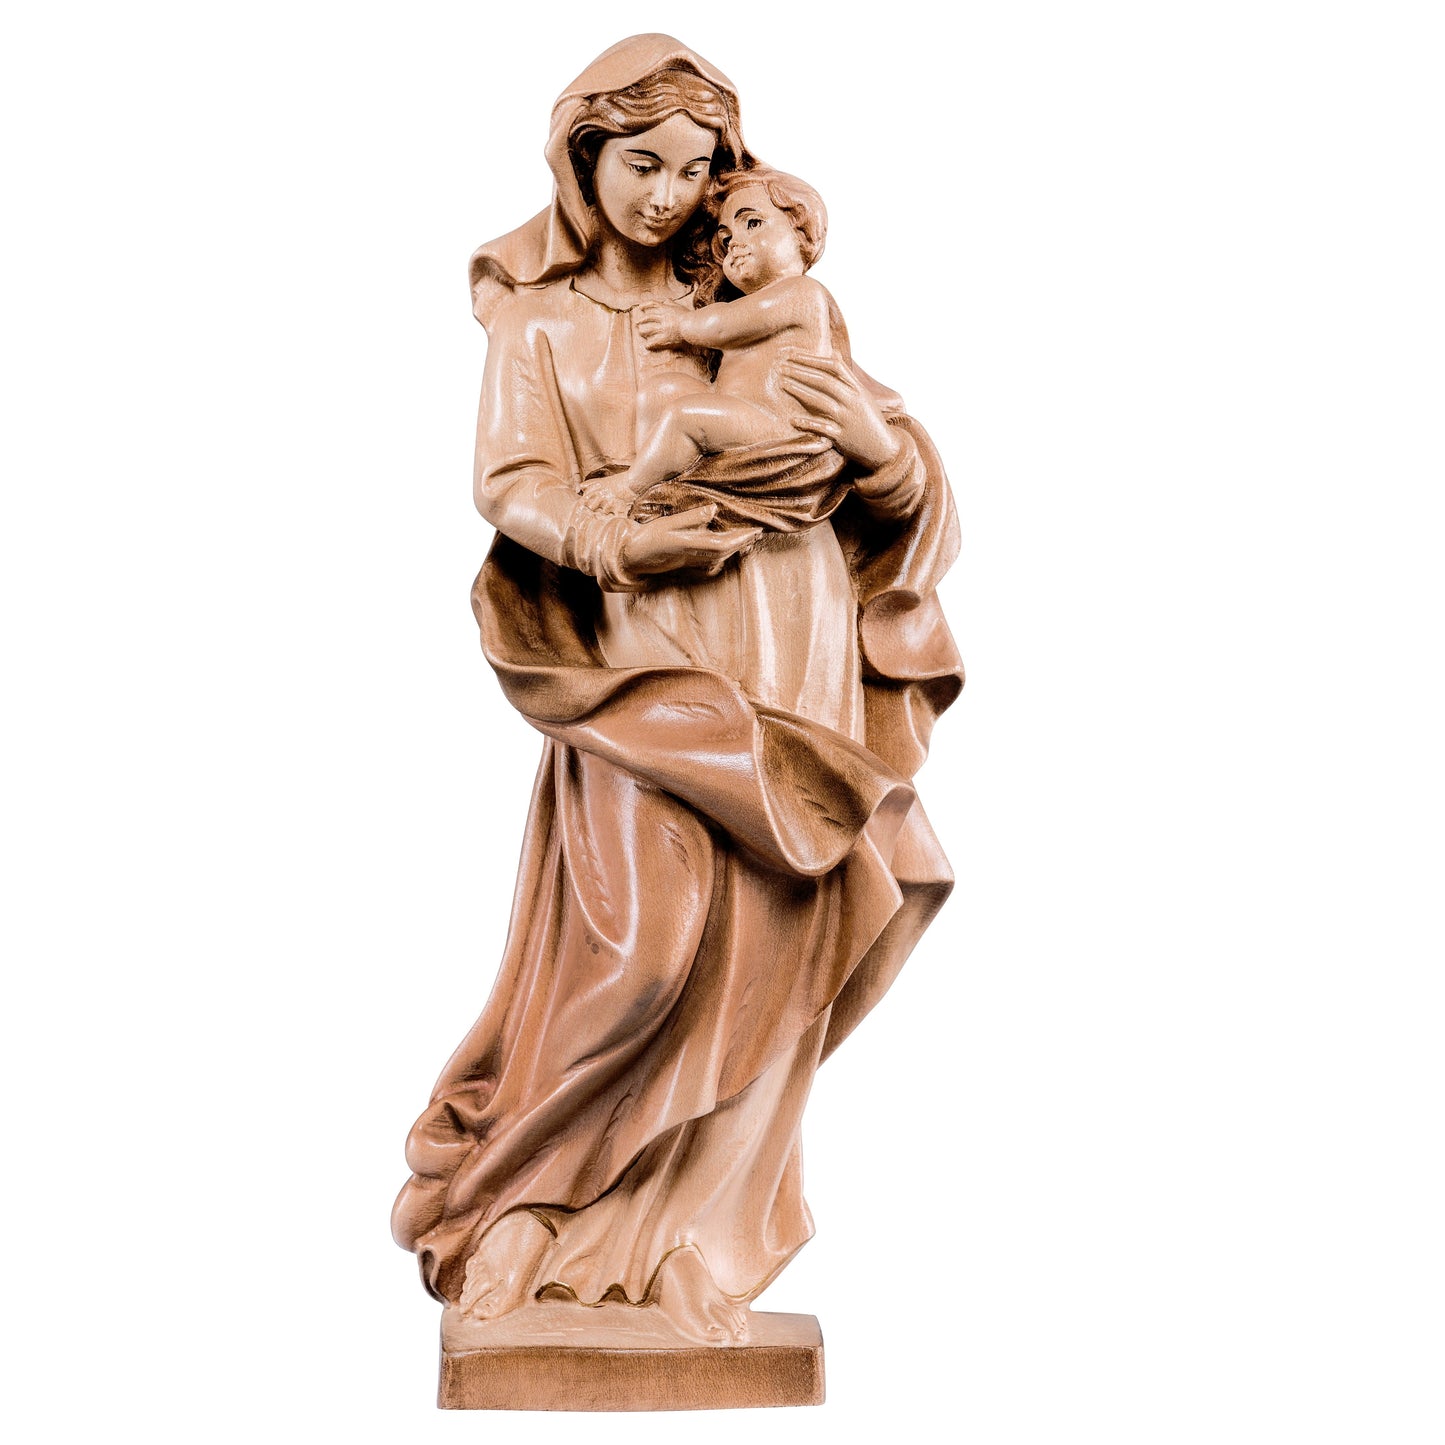 MONDO CATTOLICO Glossy / 20 cm (7.9 in) Wooden statue of Madonna of gypsies